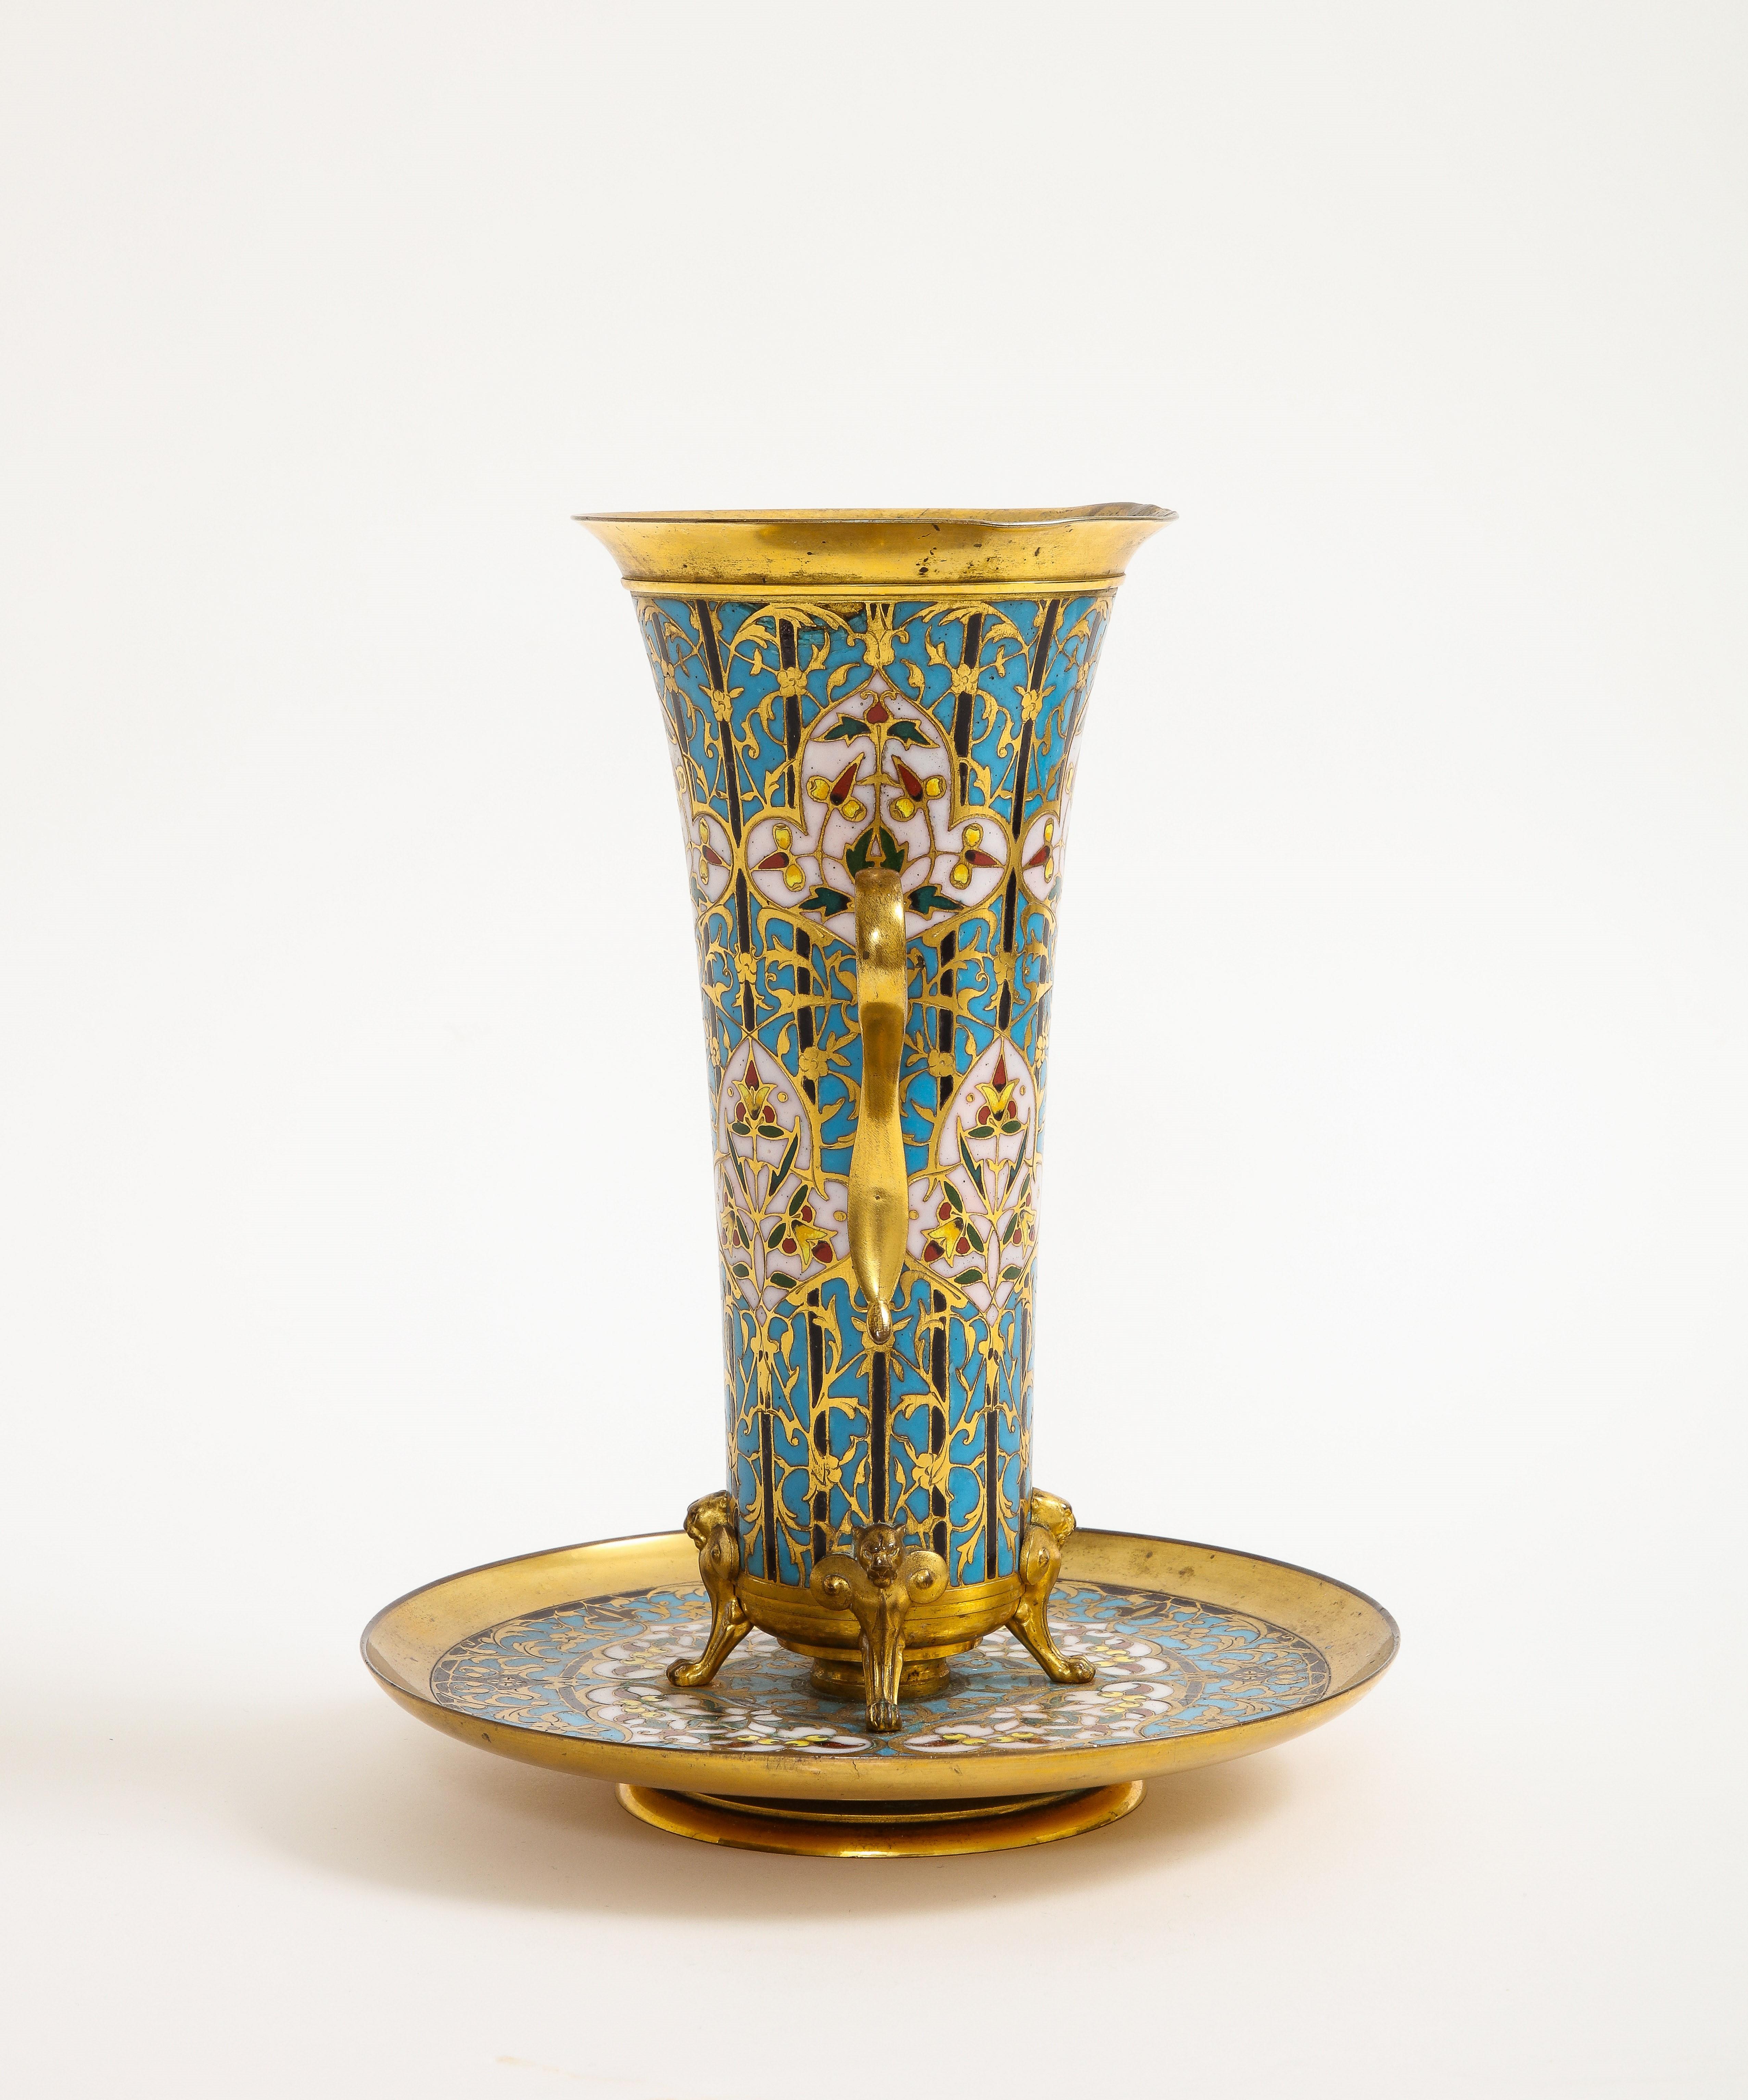 19th C. French Islamic Champleve Enamel Vase and Underplate, Signed Barbedienne For Sale 3